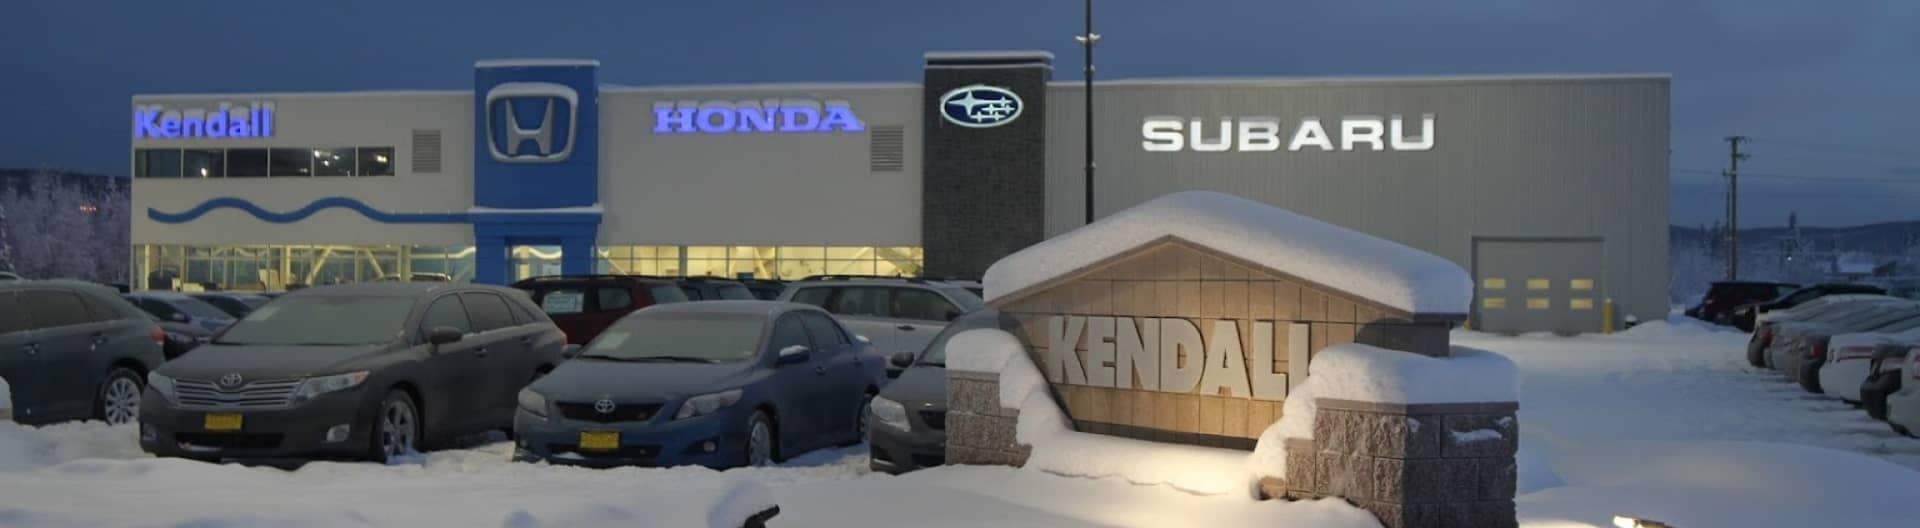 An exterior view of the top of a Subaru Dealership Building